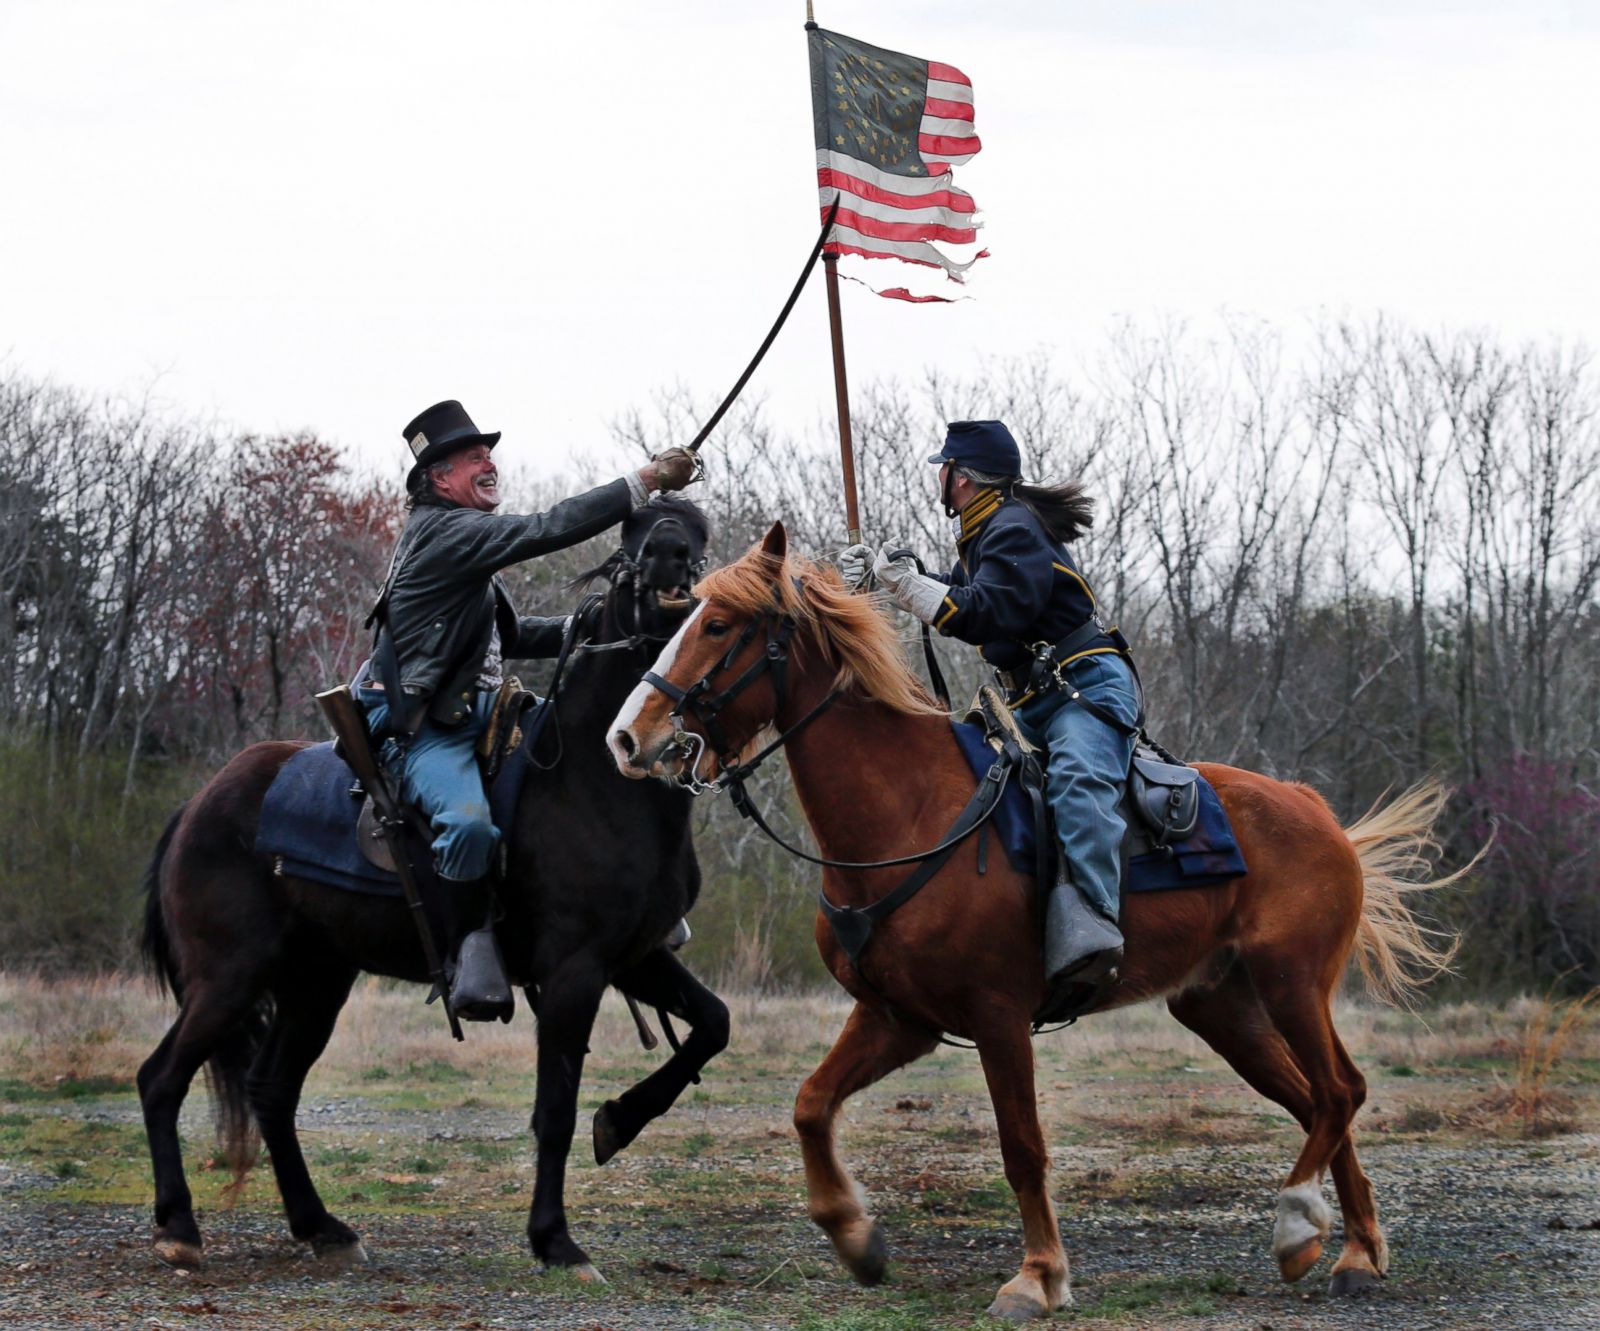 The 150th Anniversary of the Battle of Appomattox Station Photos